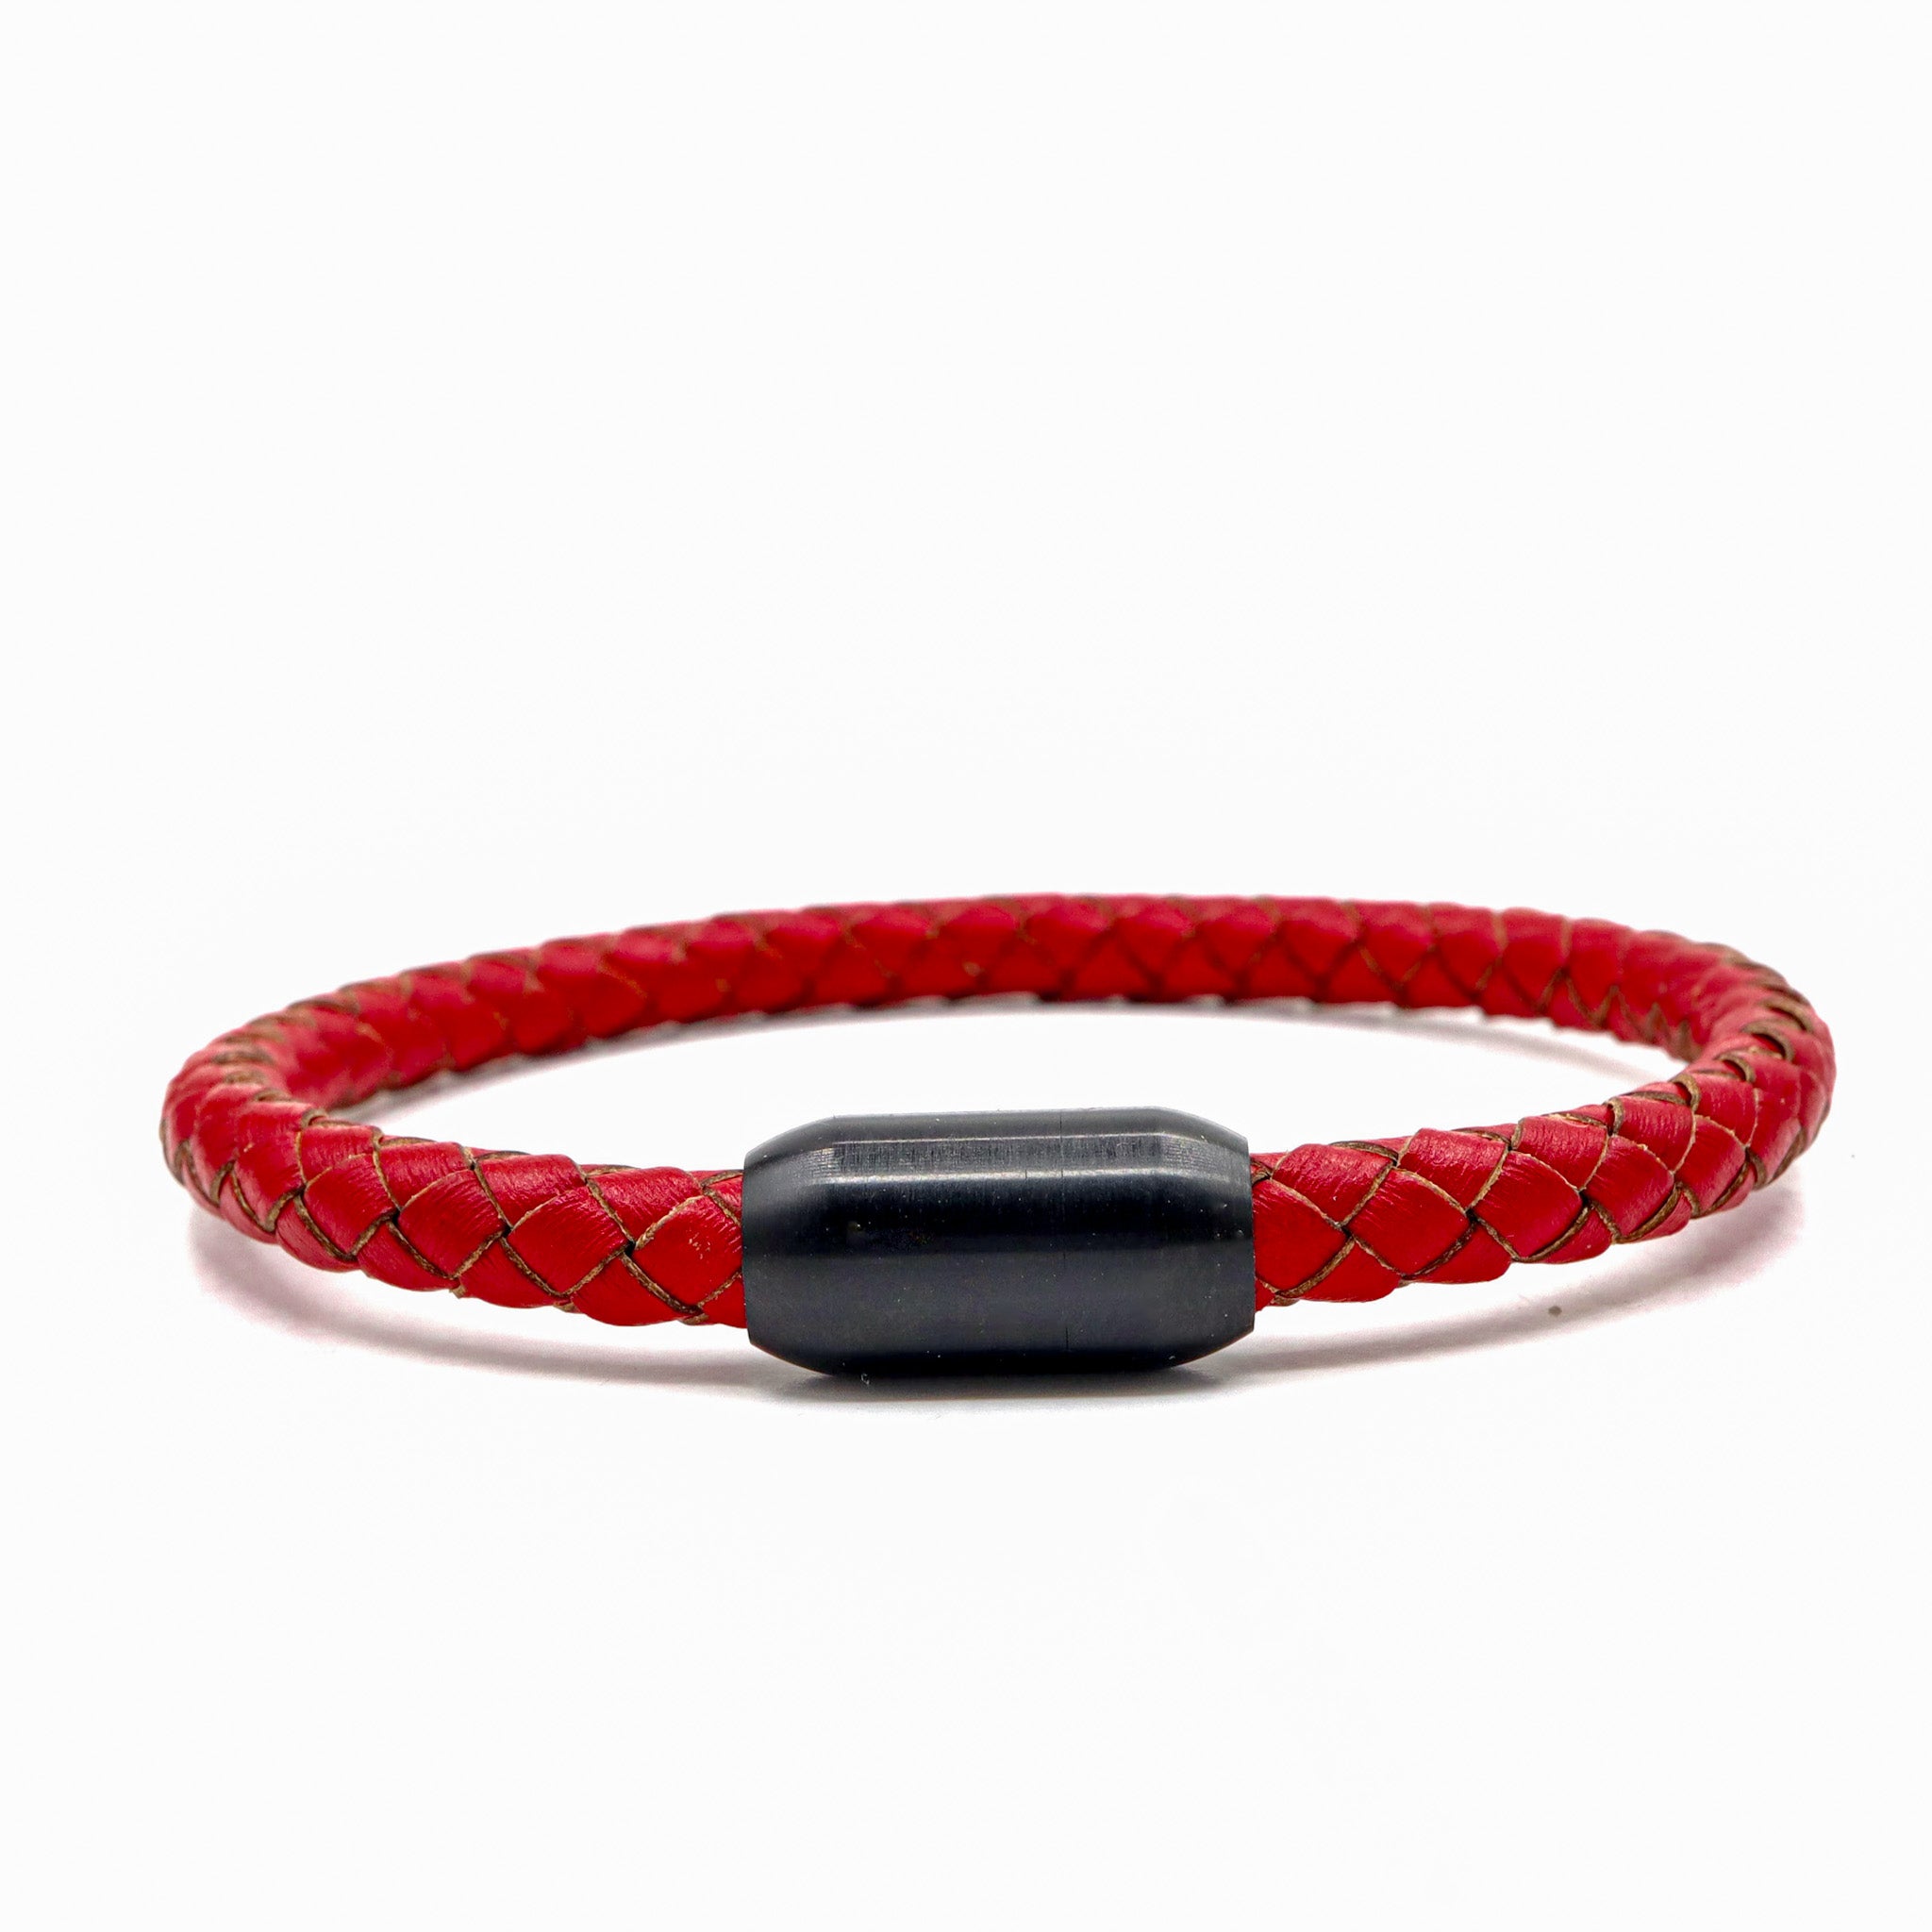 Red Leather and Matte Black Stainless Steel Men's Bracelet